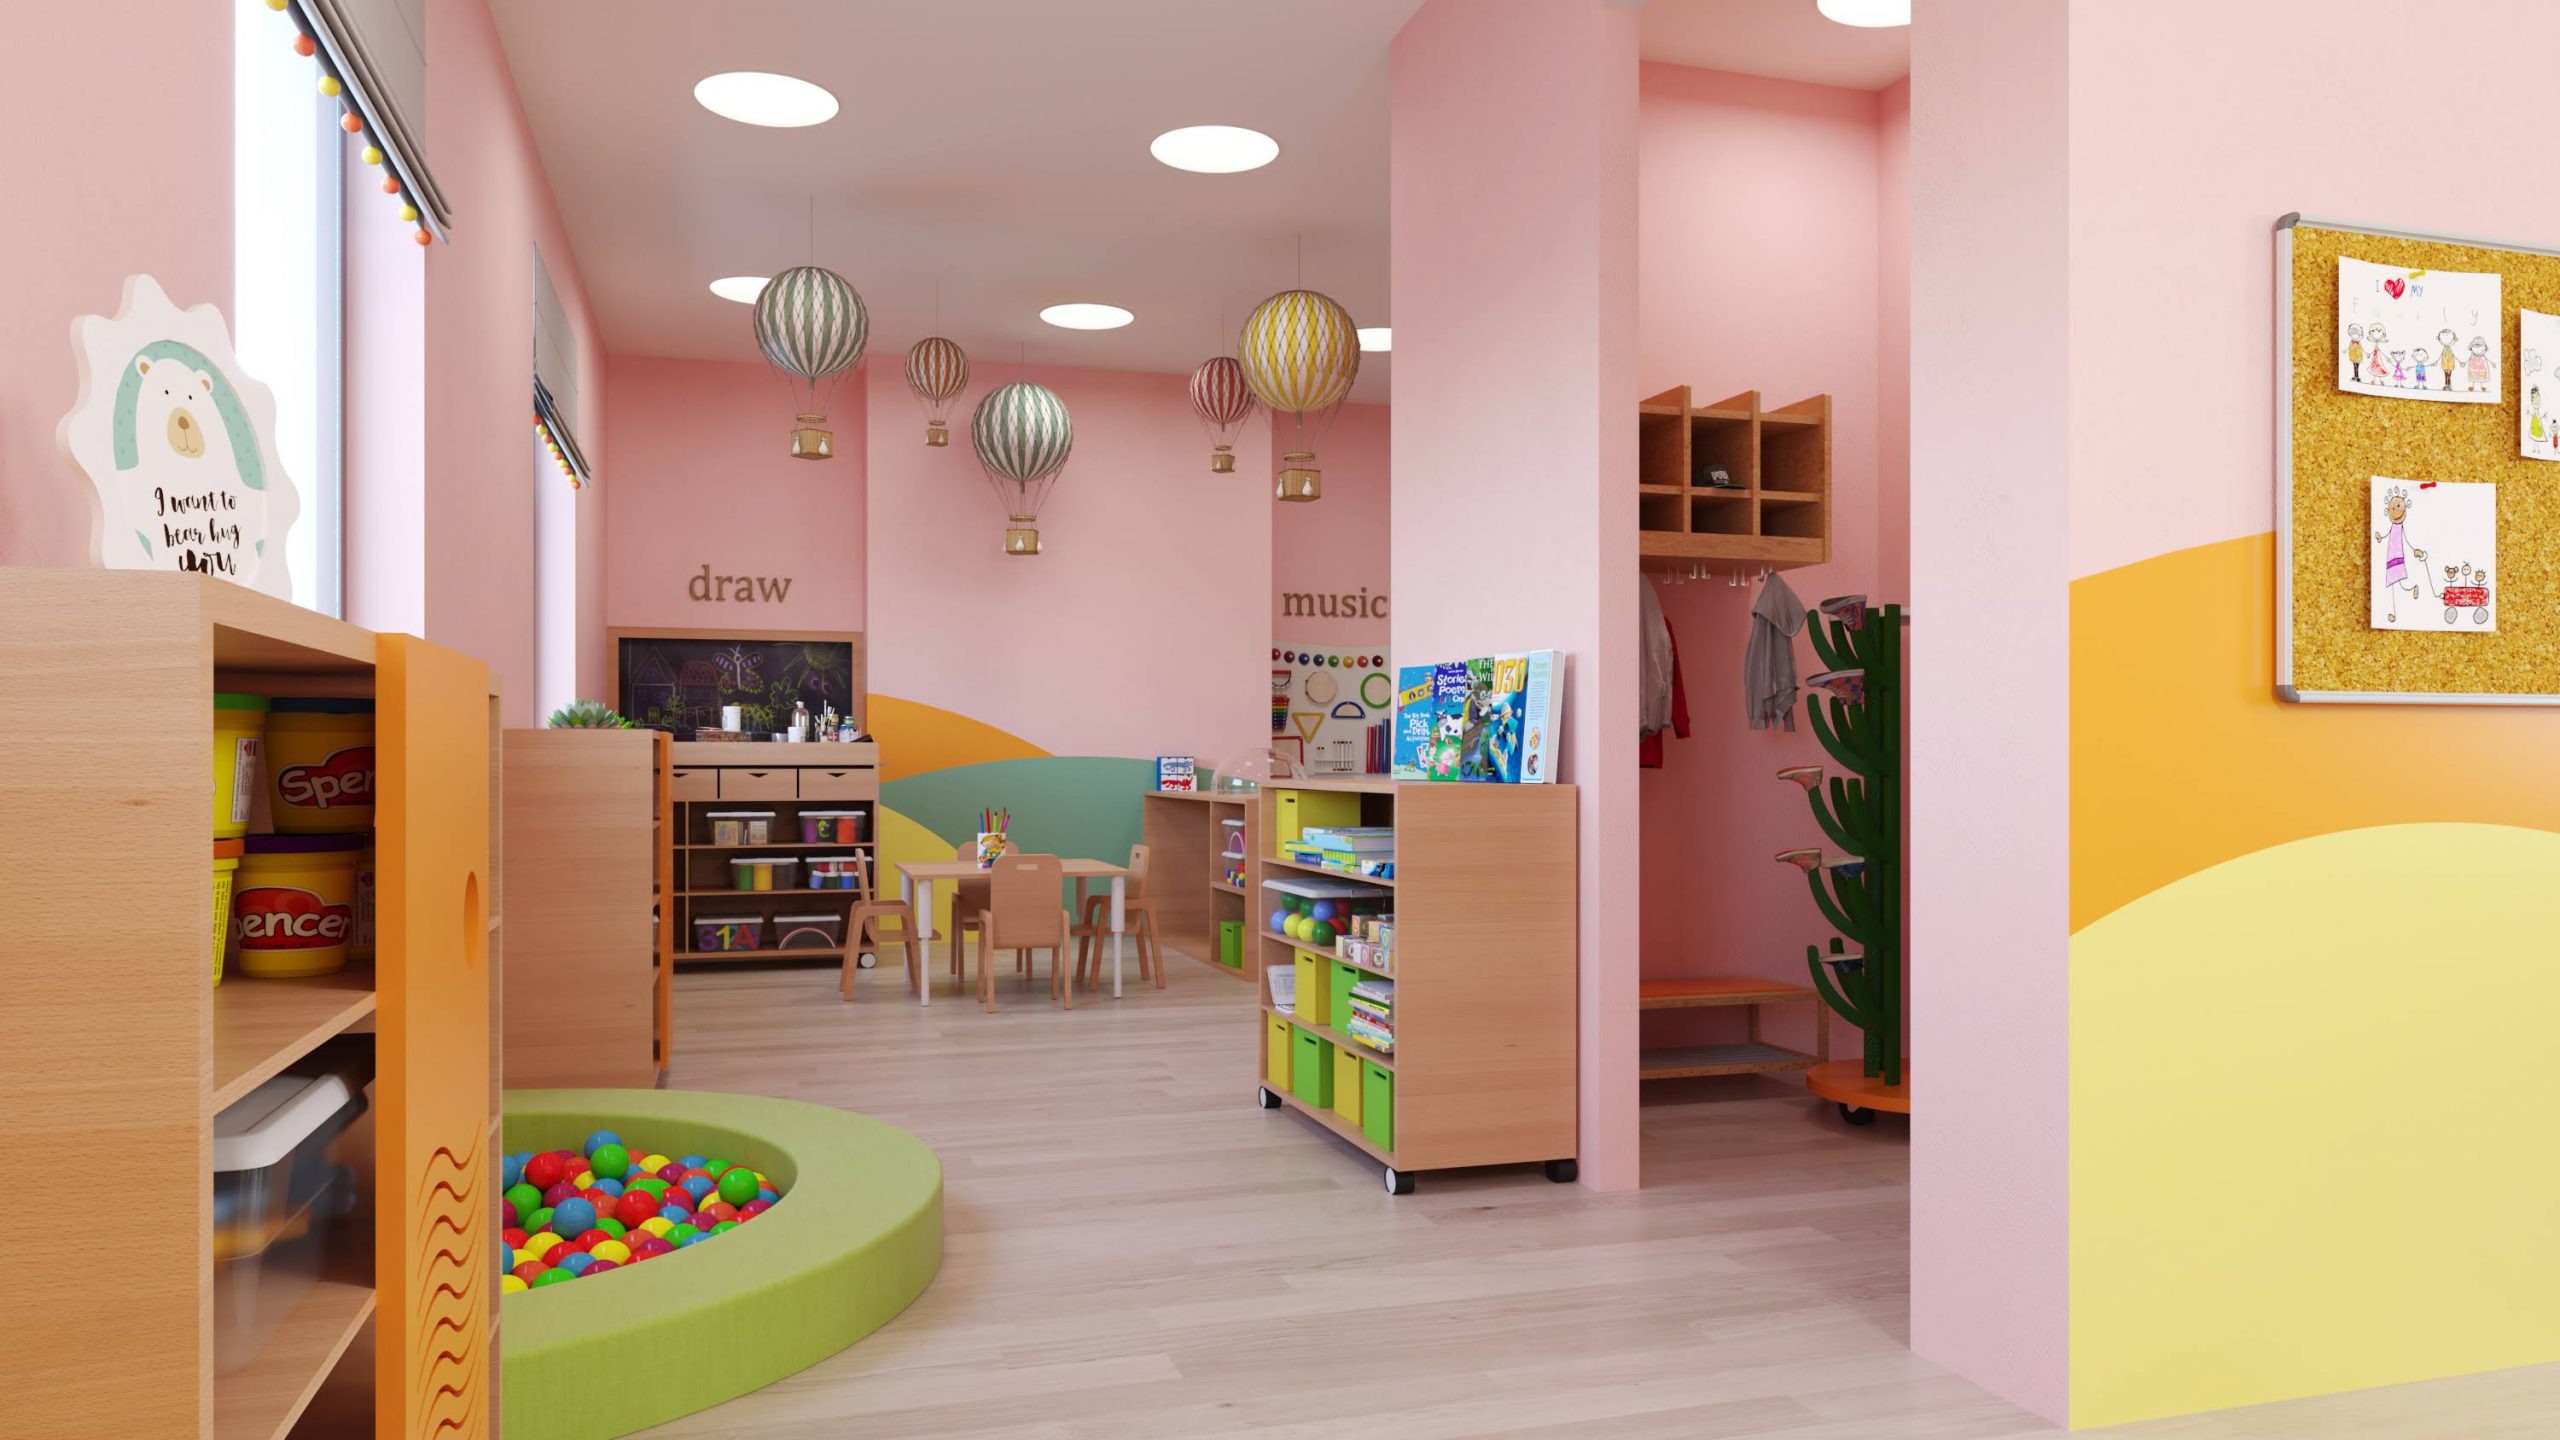 Top Ten Tips For Designing a Day Nursery